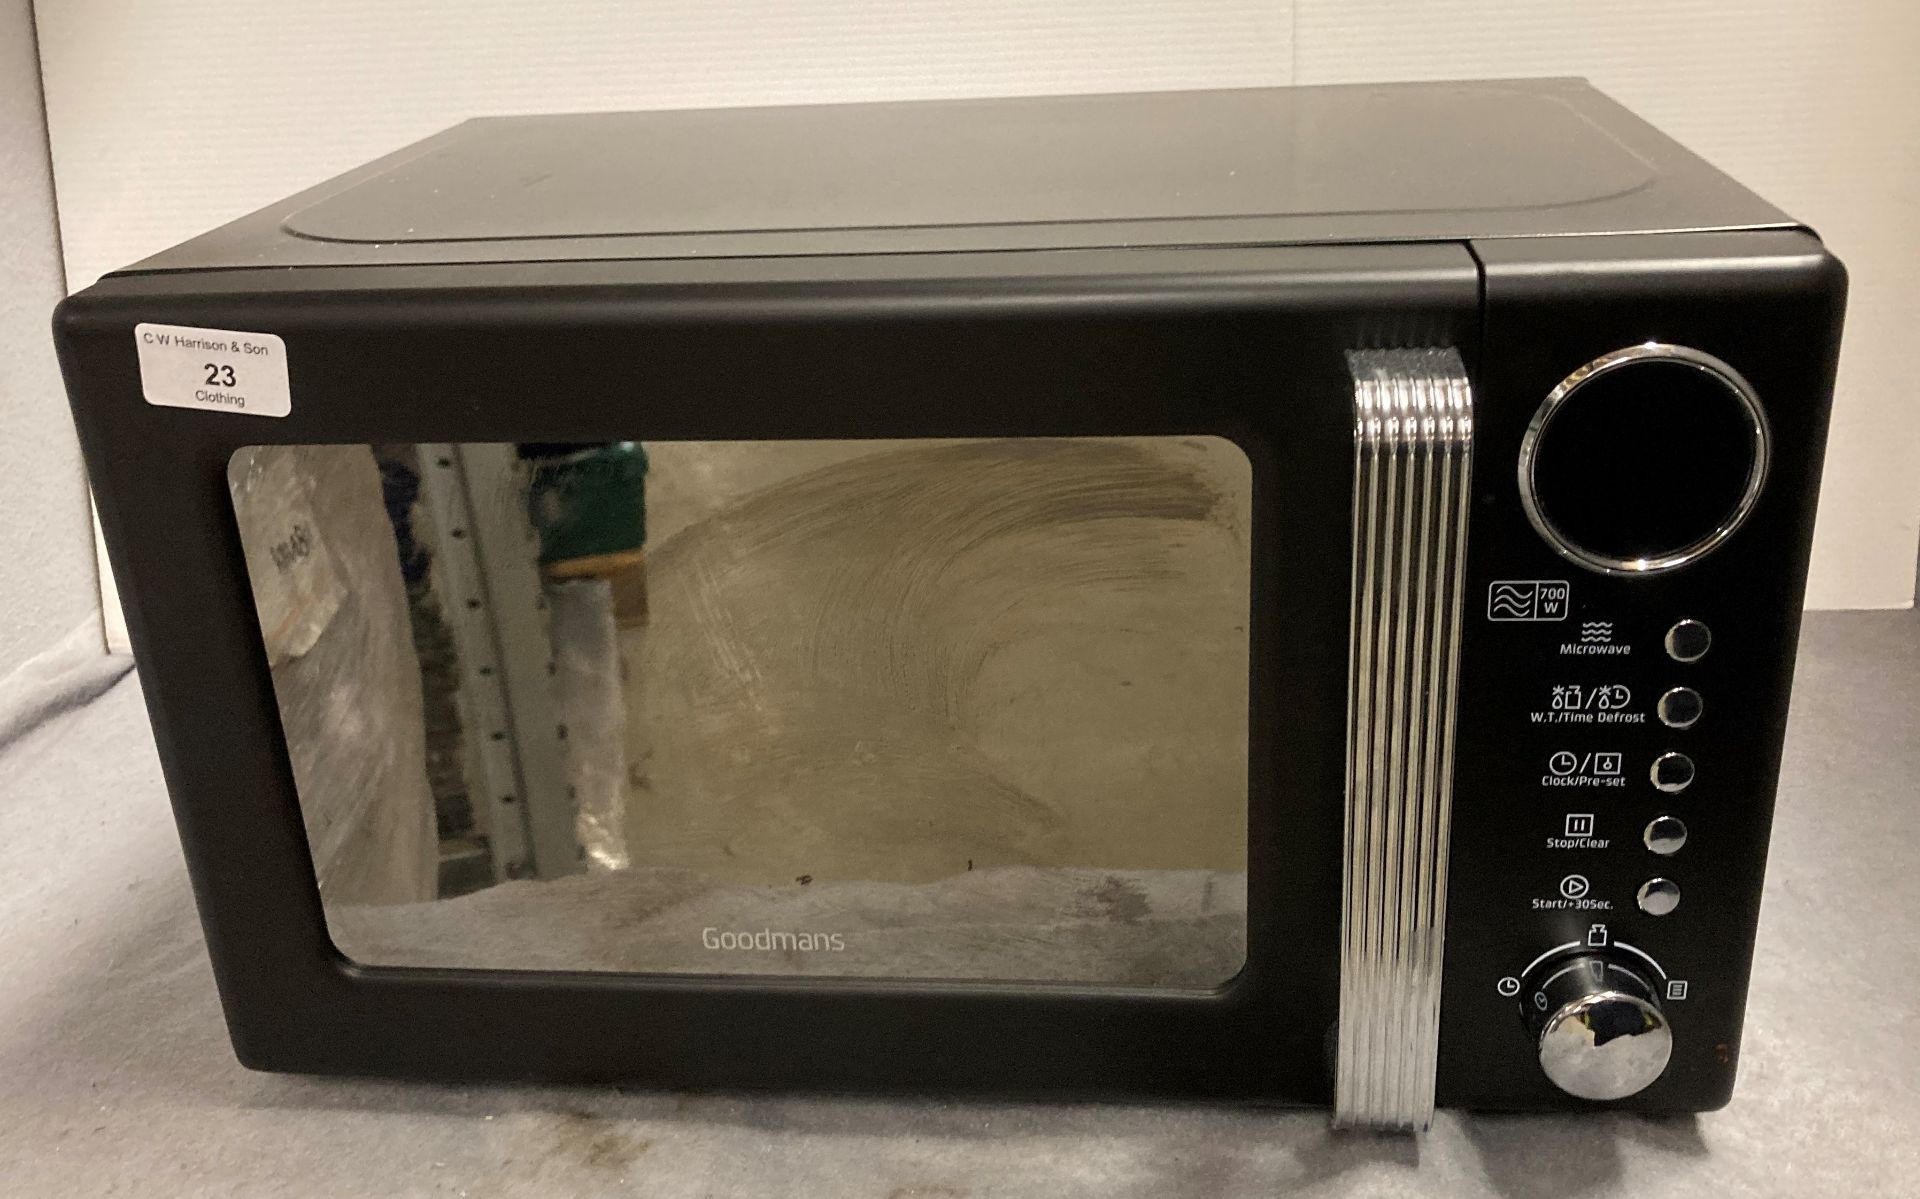 Goodman microwave oven 355250 *Please note the final purchase price is subject to 20% VAT on the